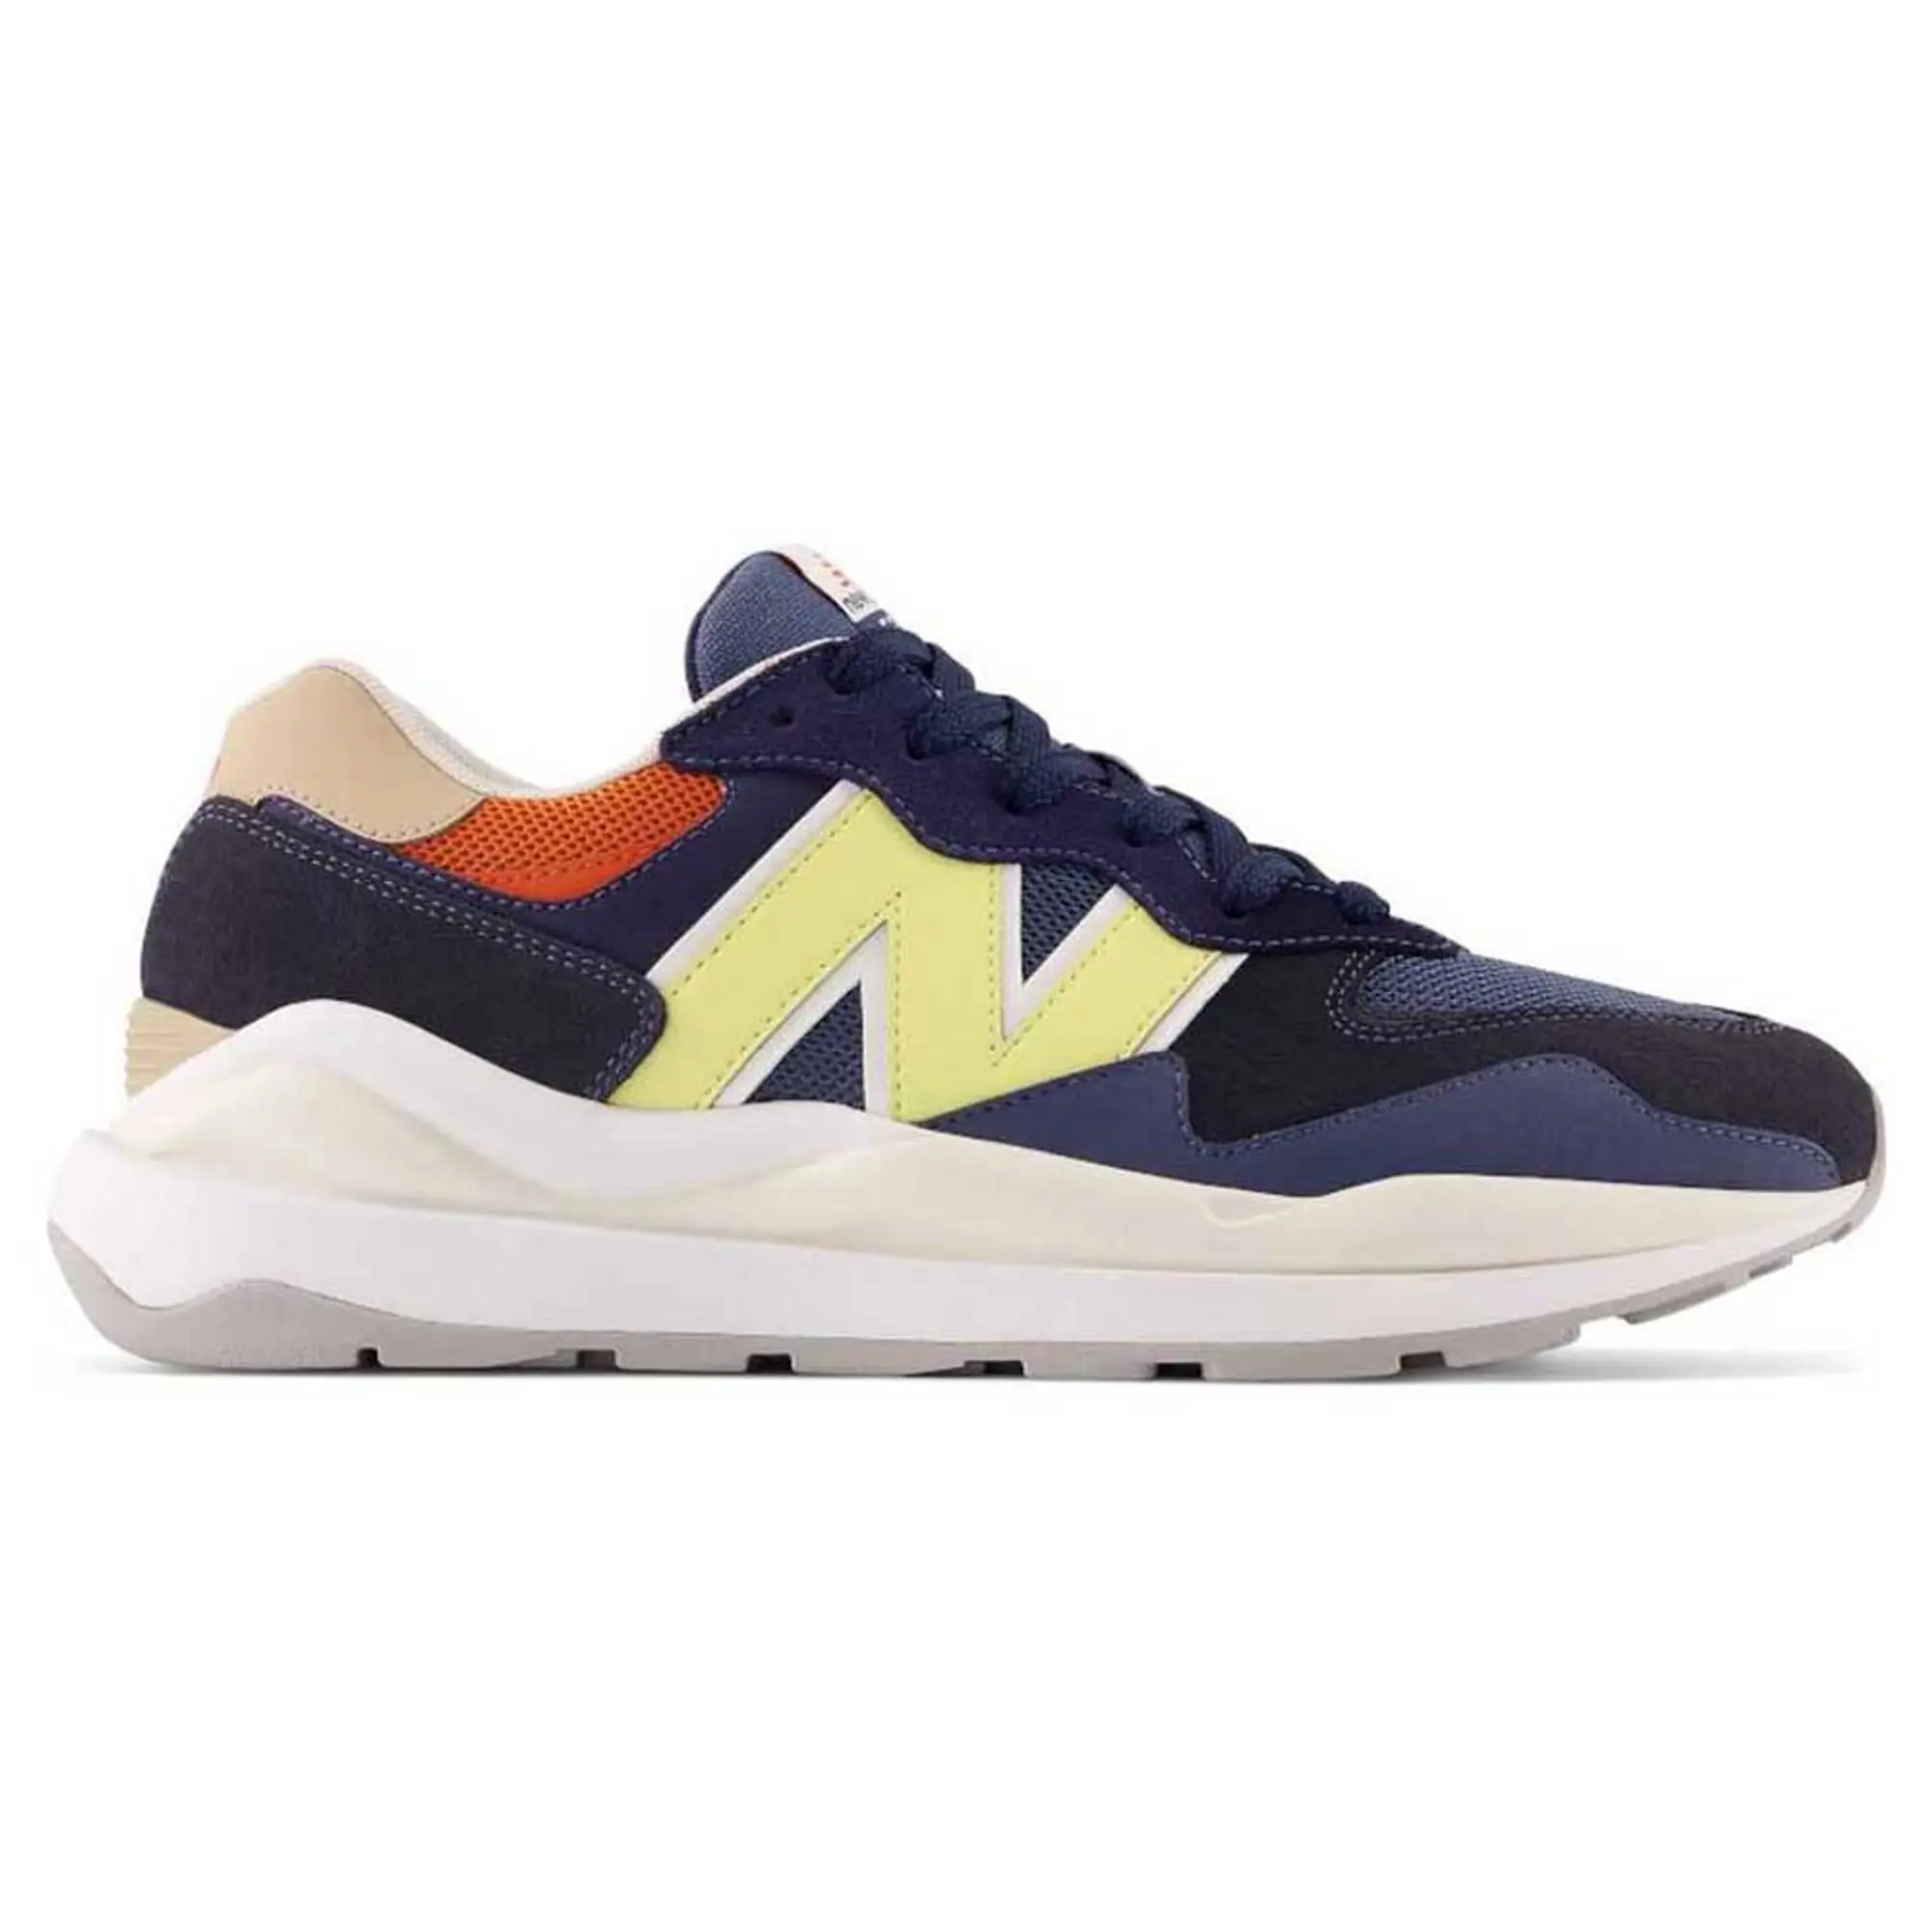 New Balance Men's 5740 in Blue/Yellow Suede/Mesh